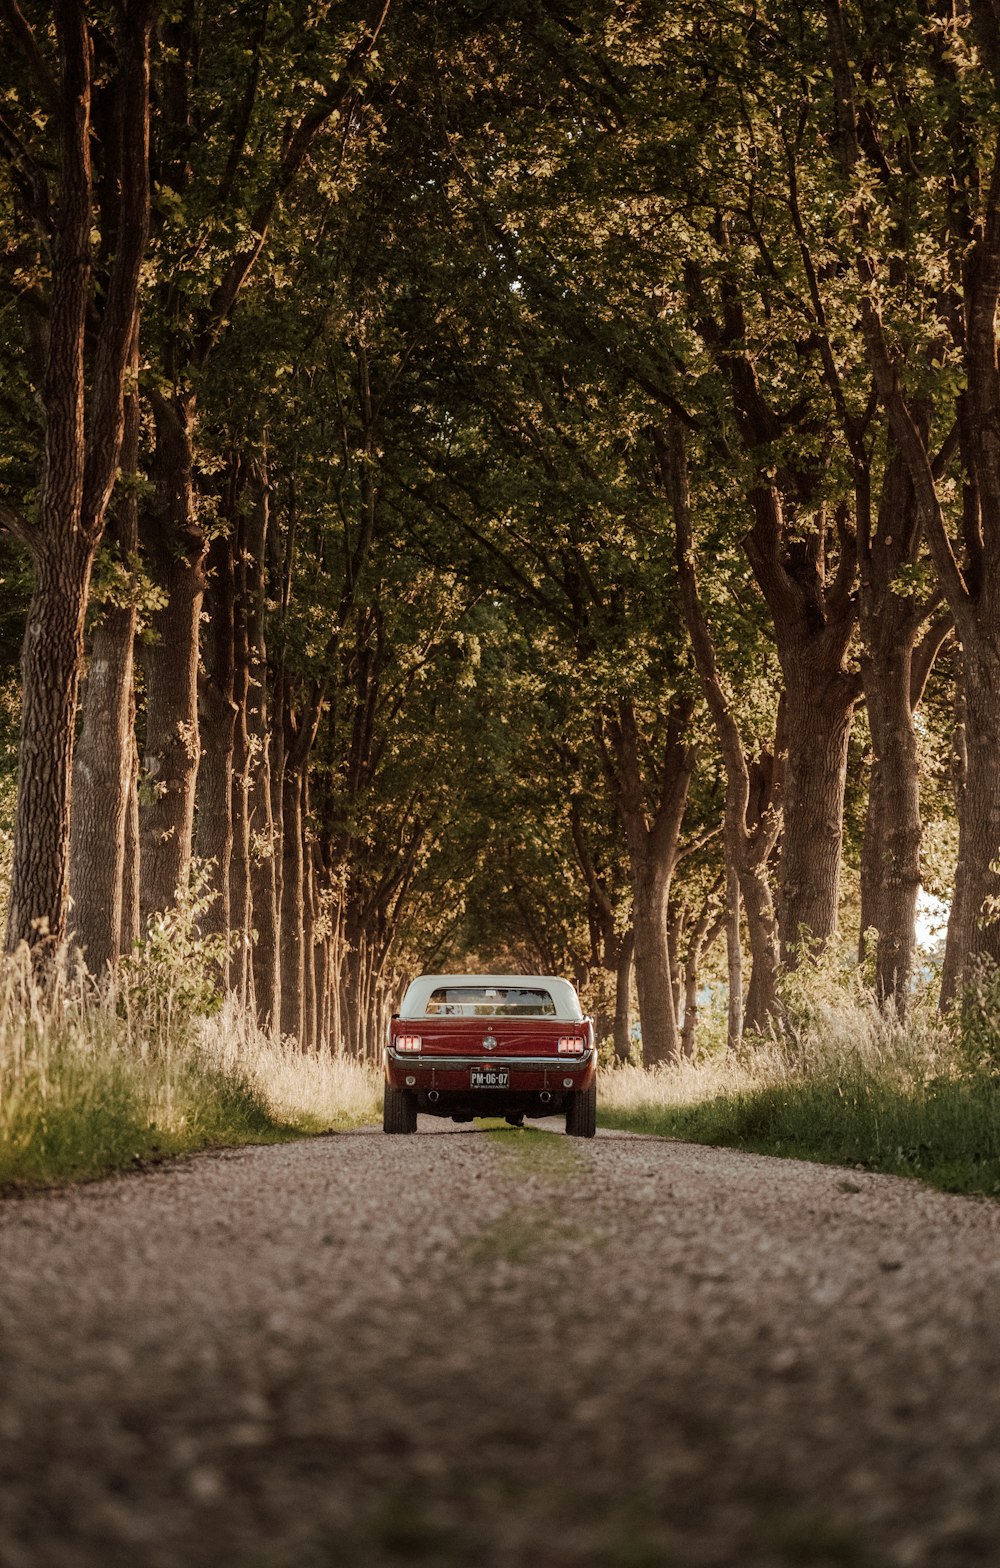 a red car on a road surrounded by trees